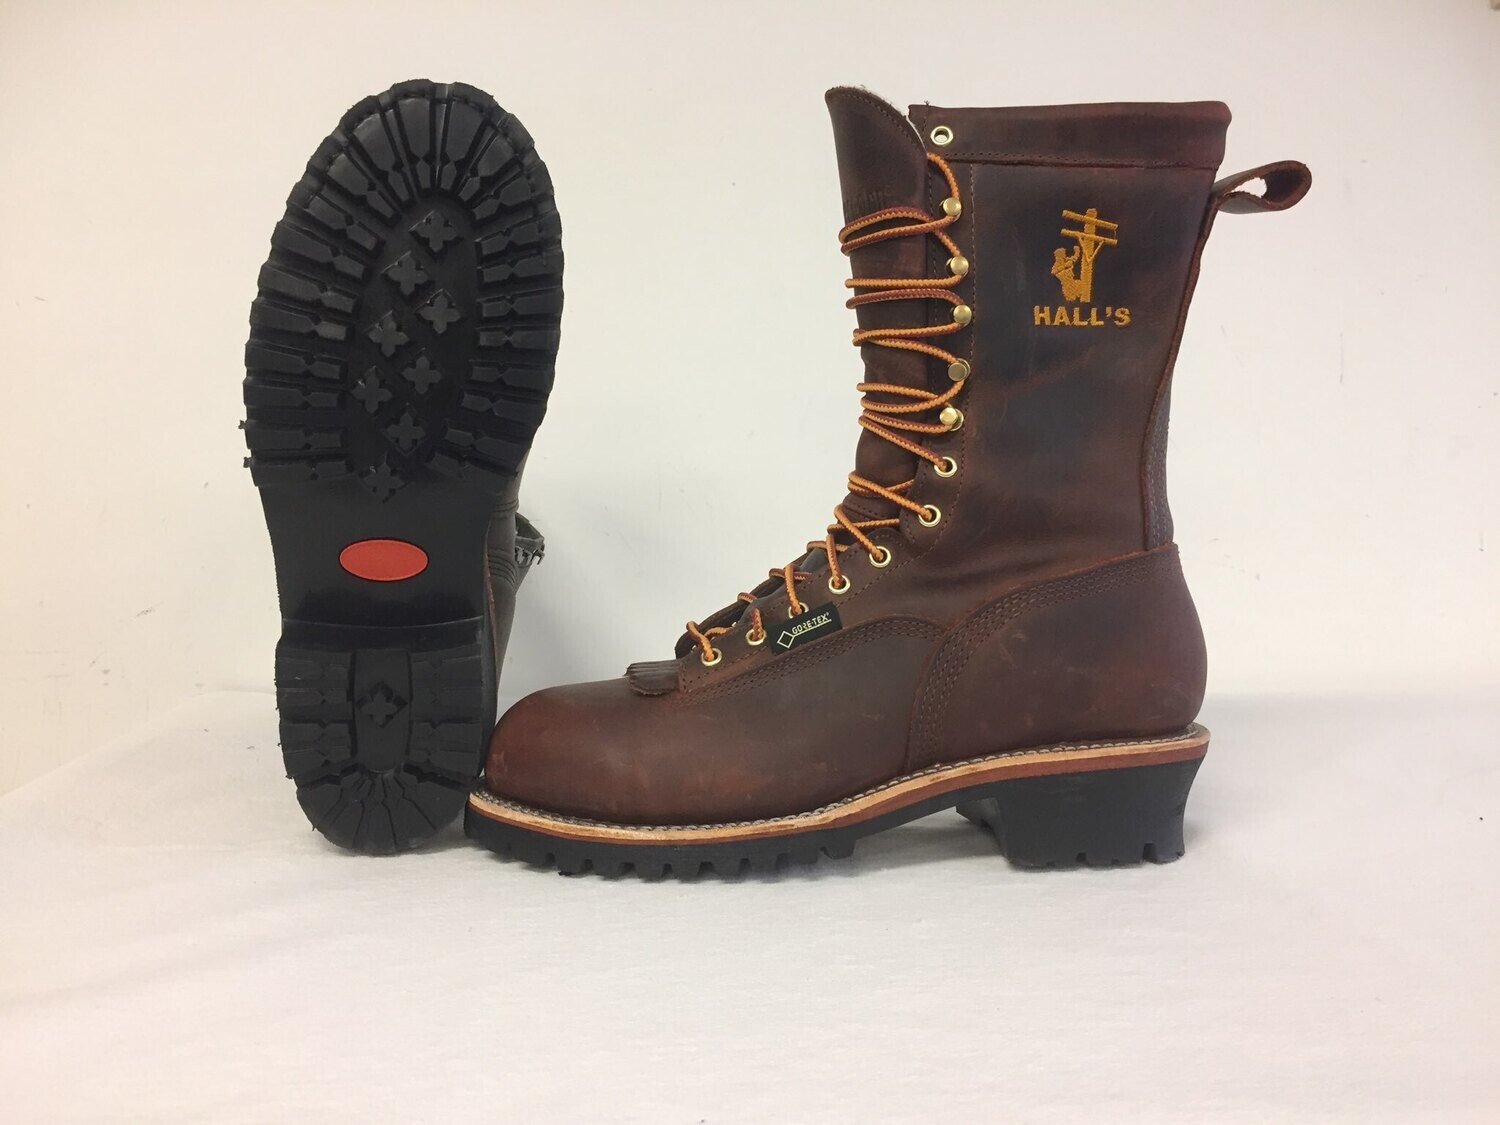 Hall's 710W 10" Waterproof Composite Toe Patch Lineman Boot (Rusty Red)